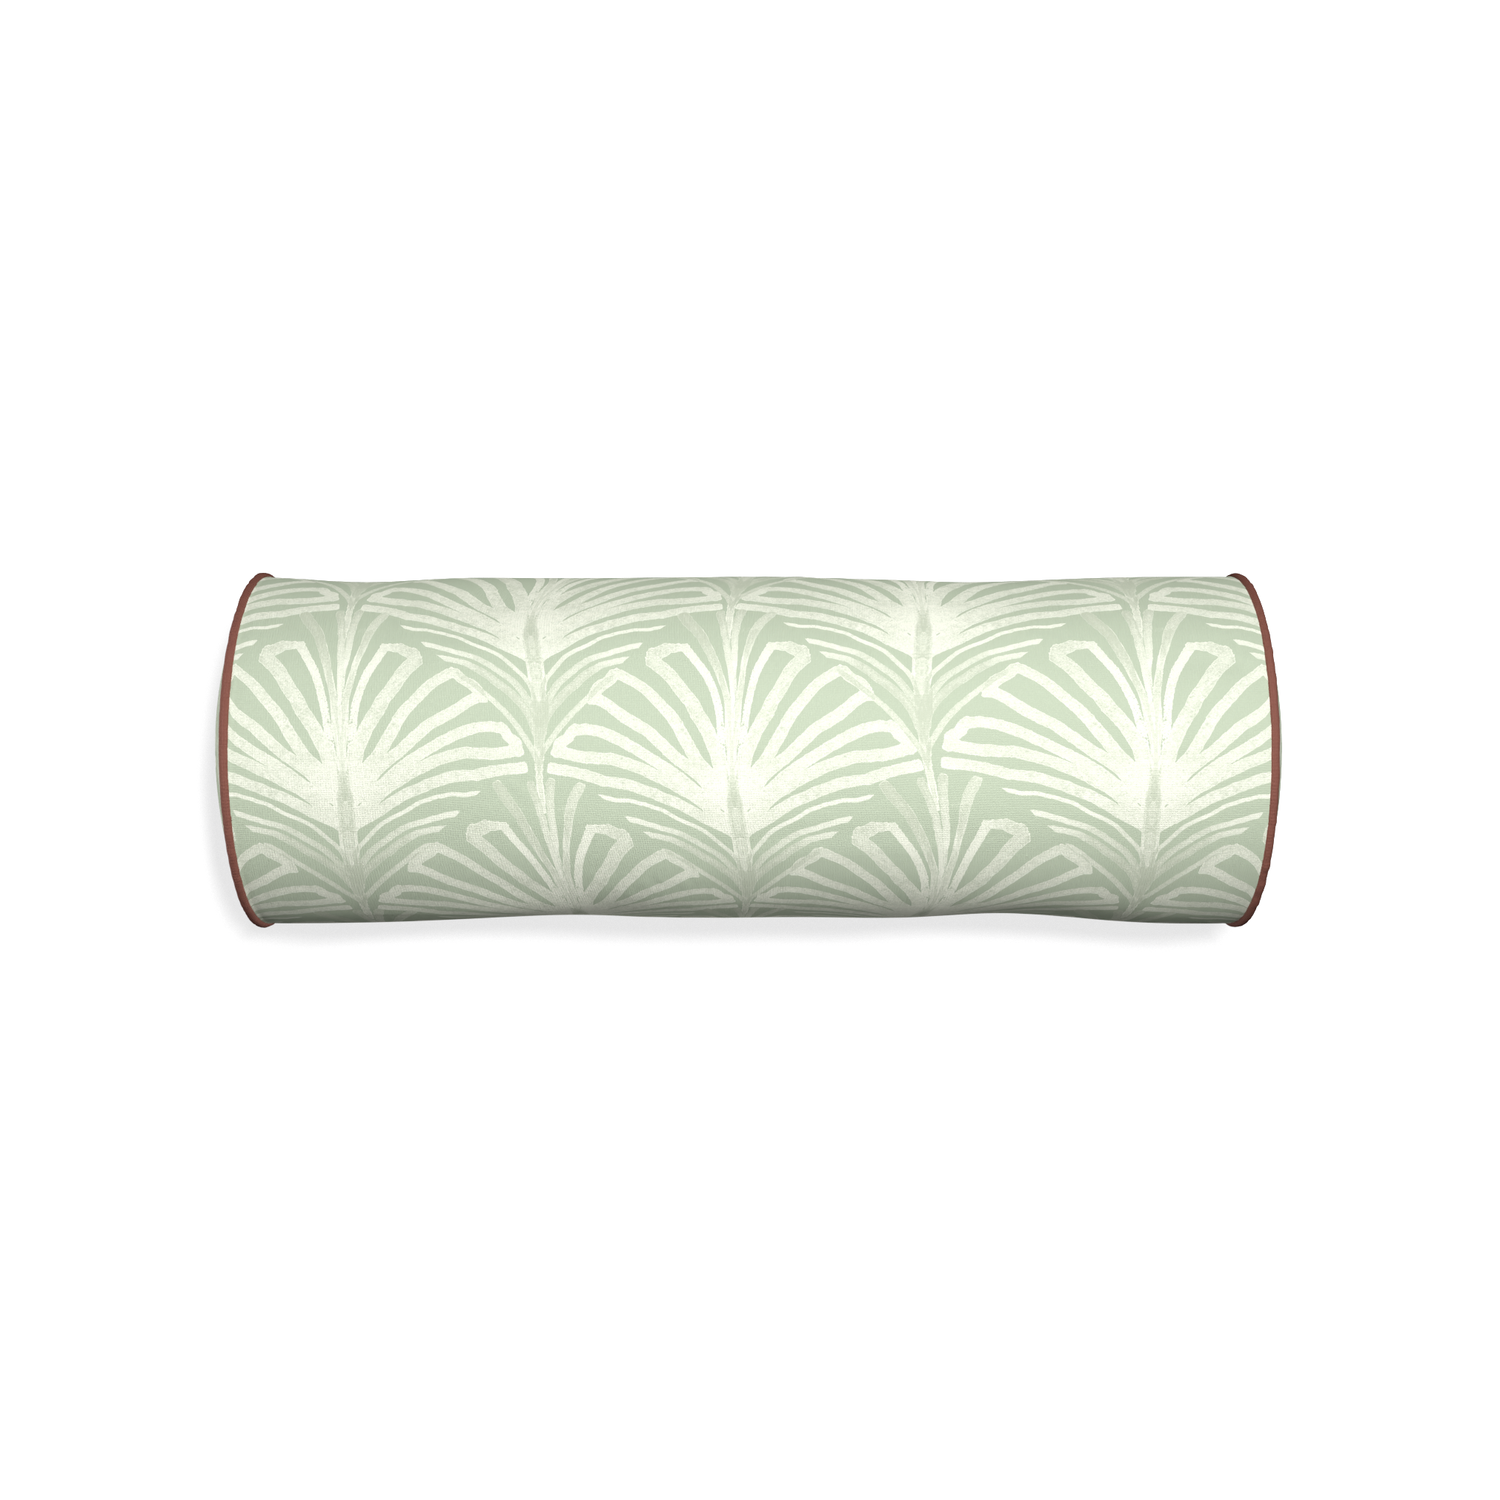 Bolster suzy sage custom pillow with w piping on white background